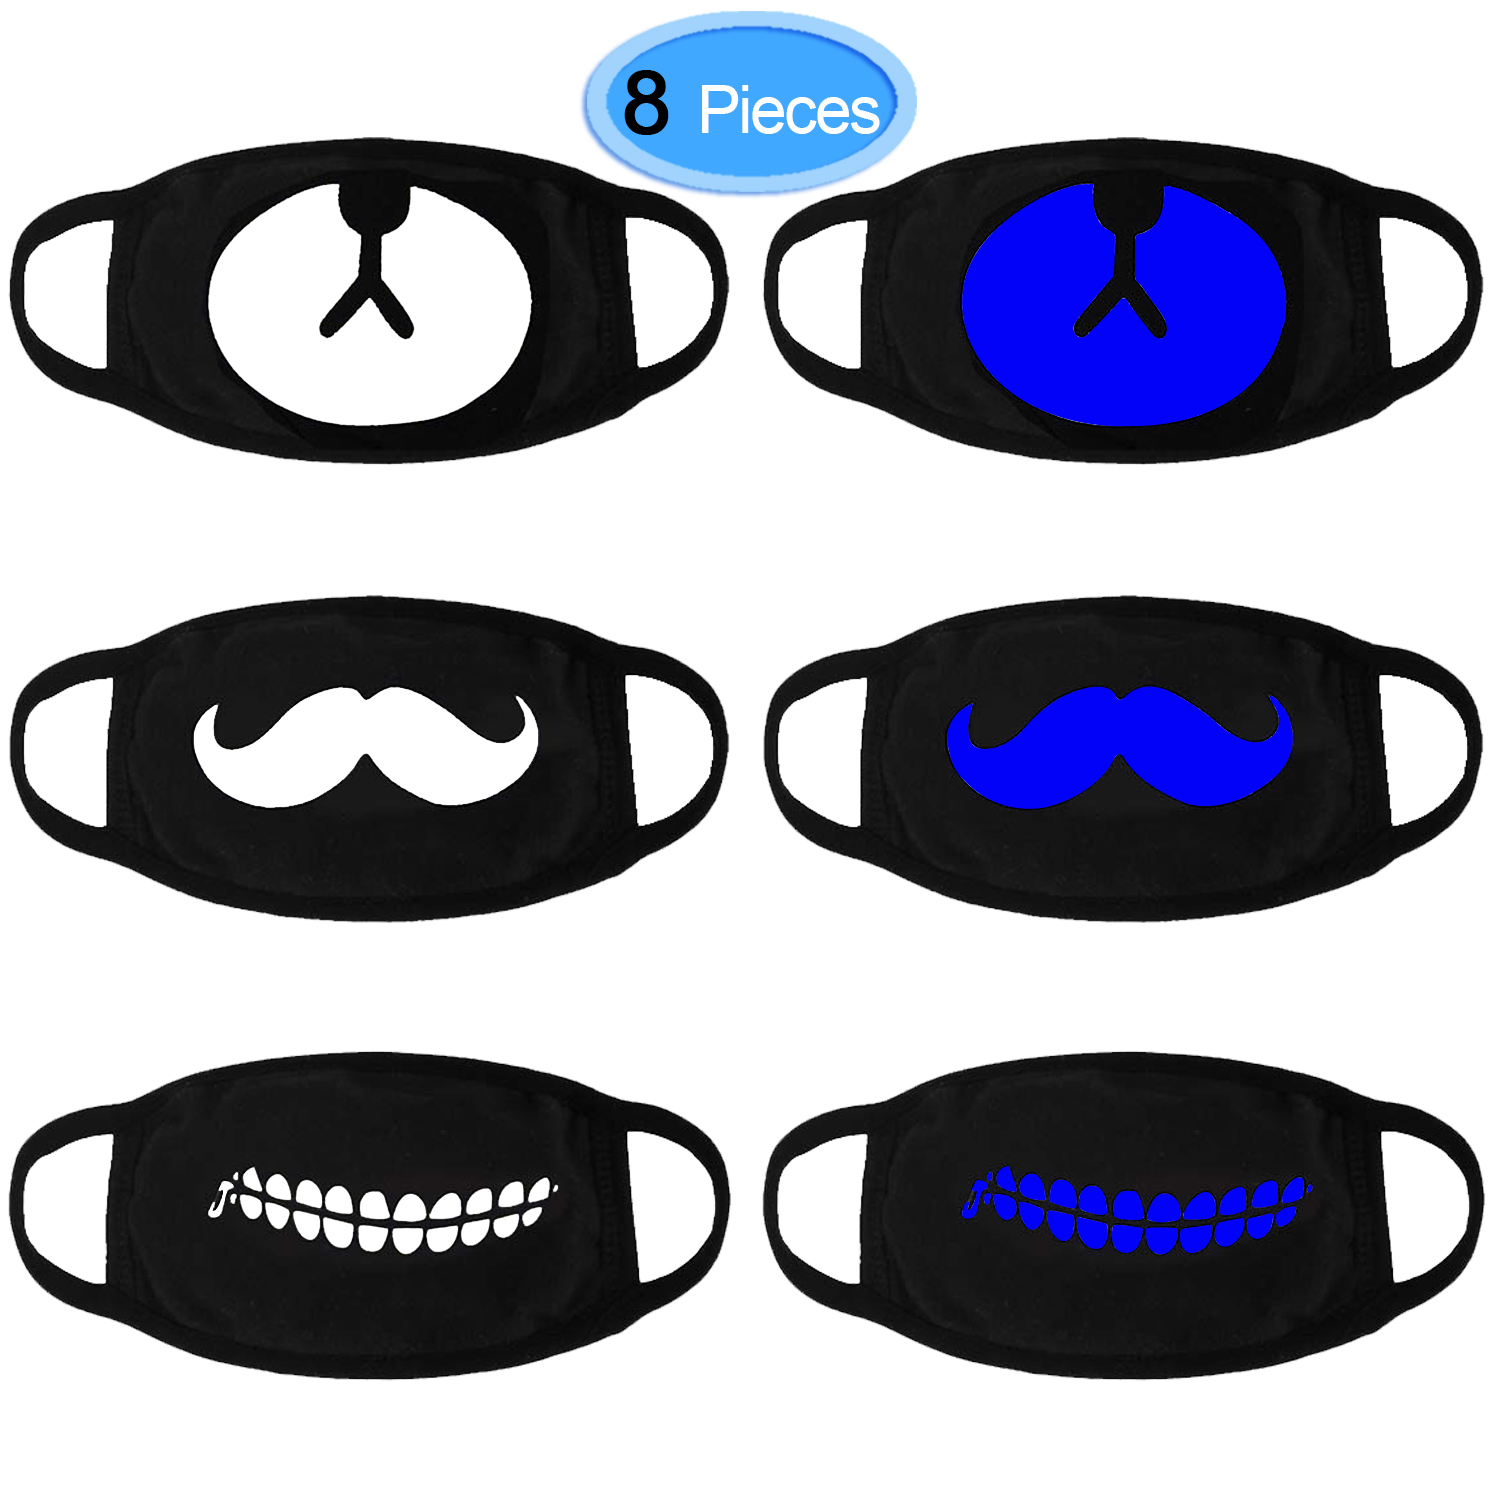 Mouth Mask, EAONE 8 Packs Cool Luminous Unisex Face Mask Cute Pattern Kpop Mask Washable Anti Dust Cotton Mouth Face Mask for Teens Men and Women (Black with Blue Fluorescence) 